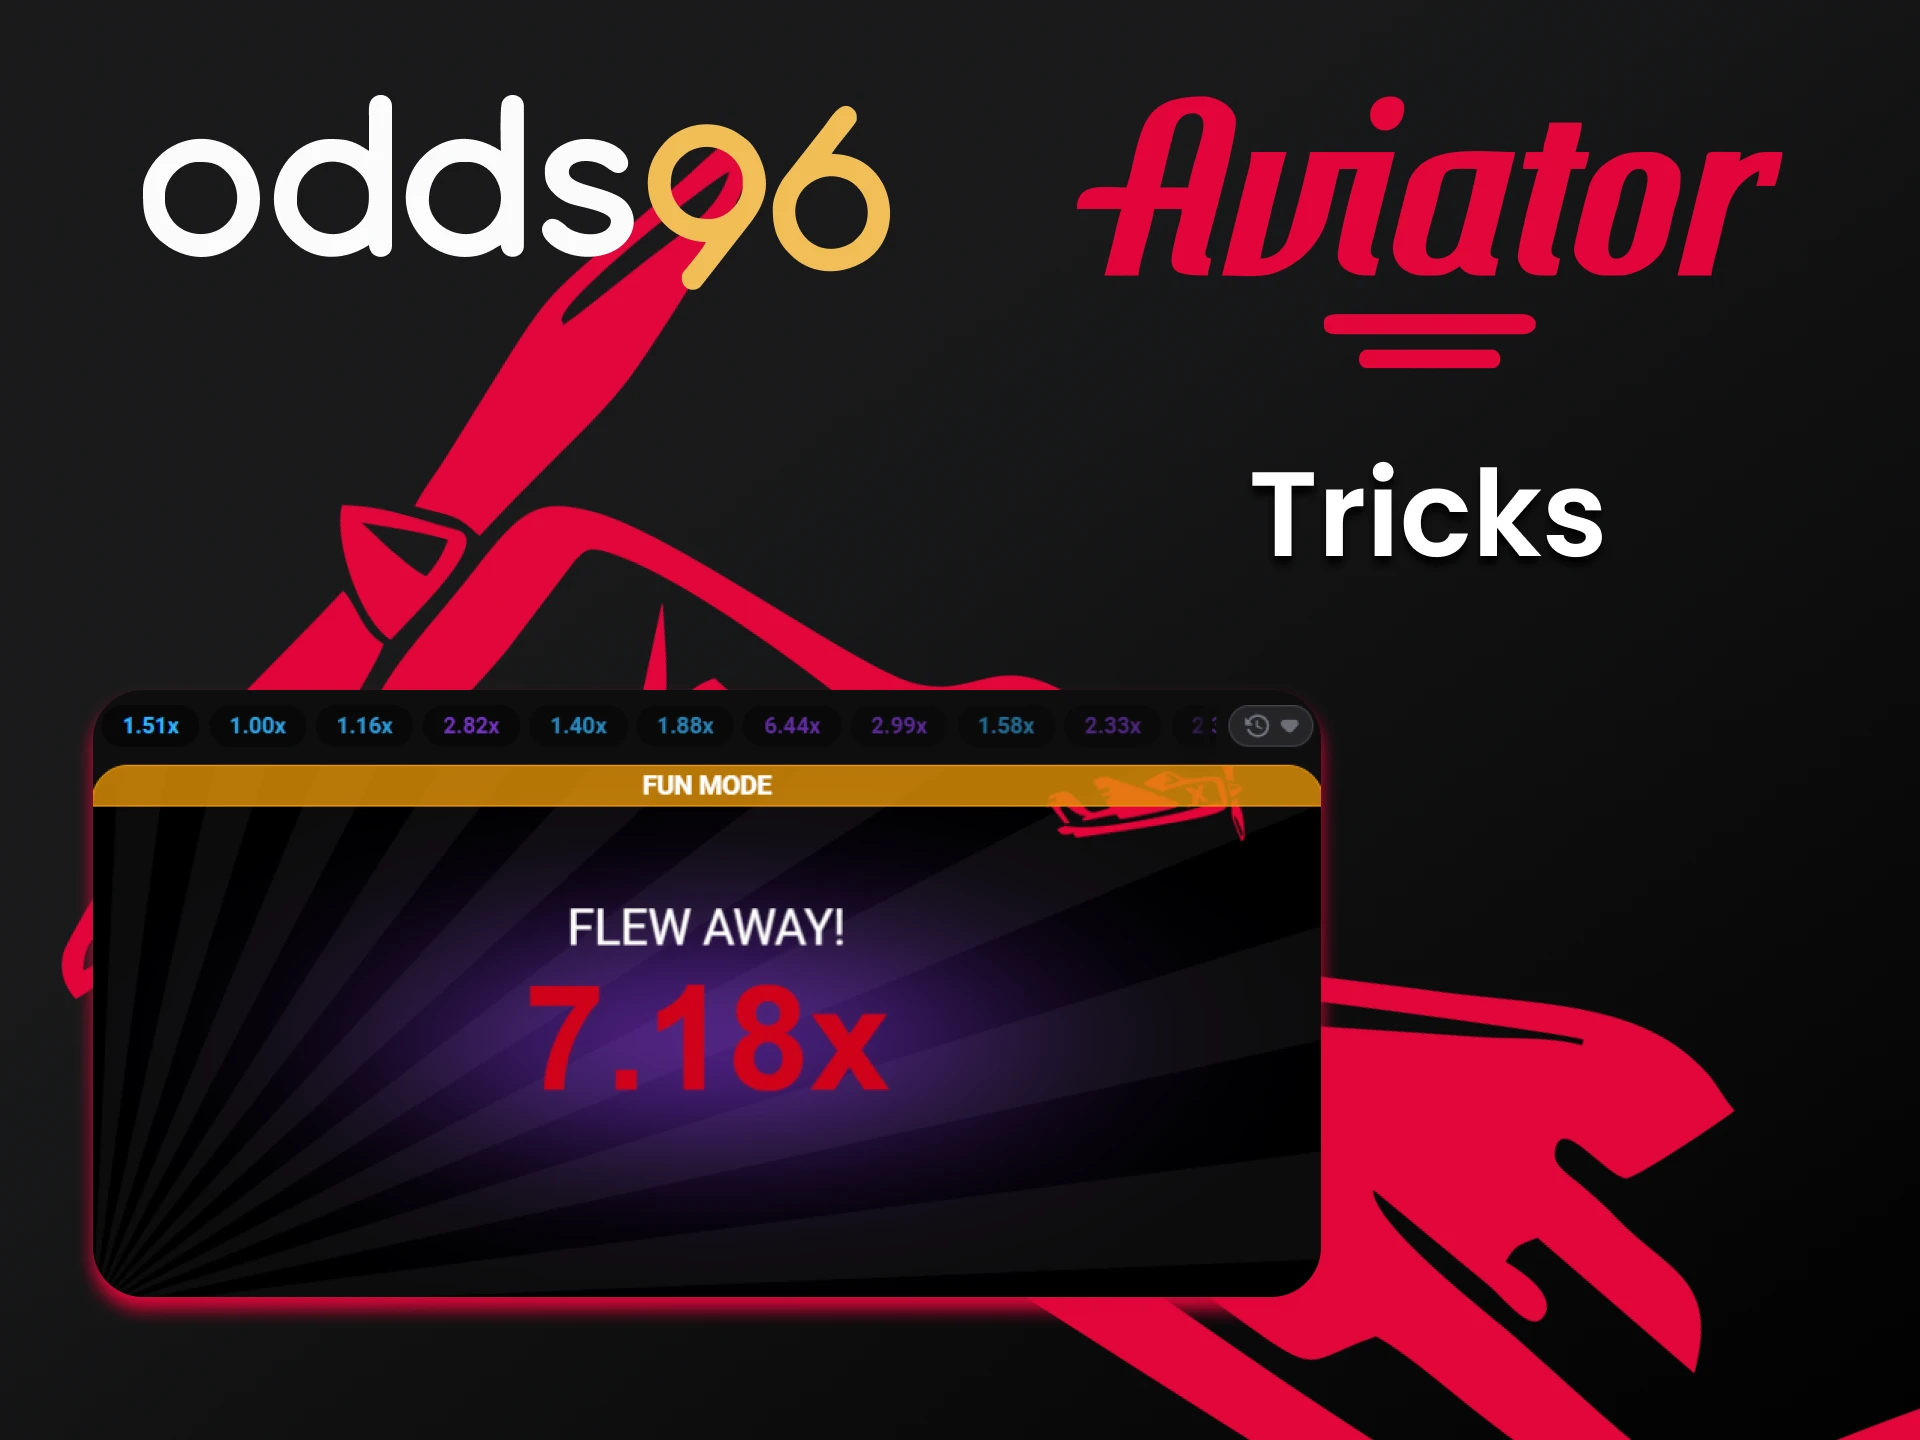 Choose your tricks to win in Aviator at Odds96.